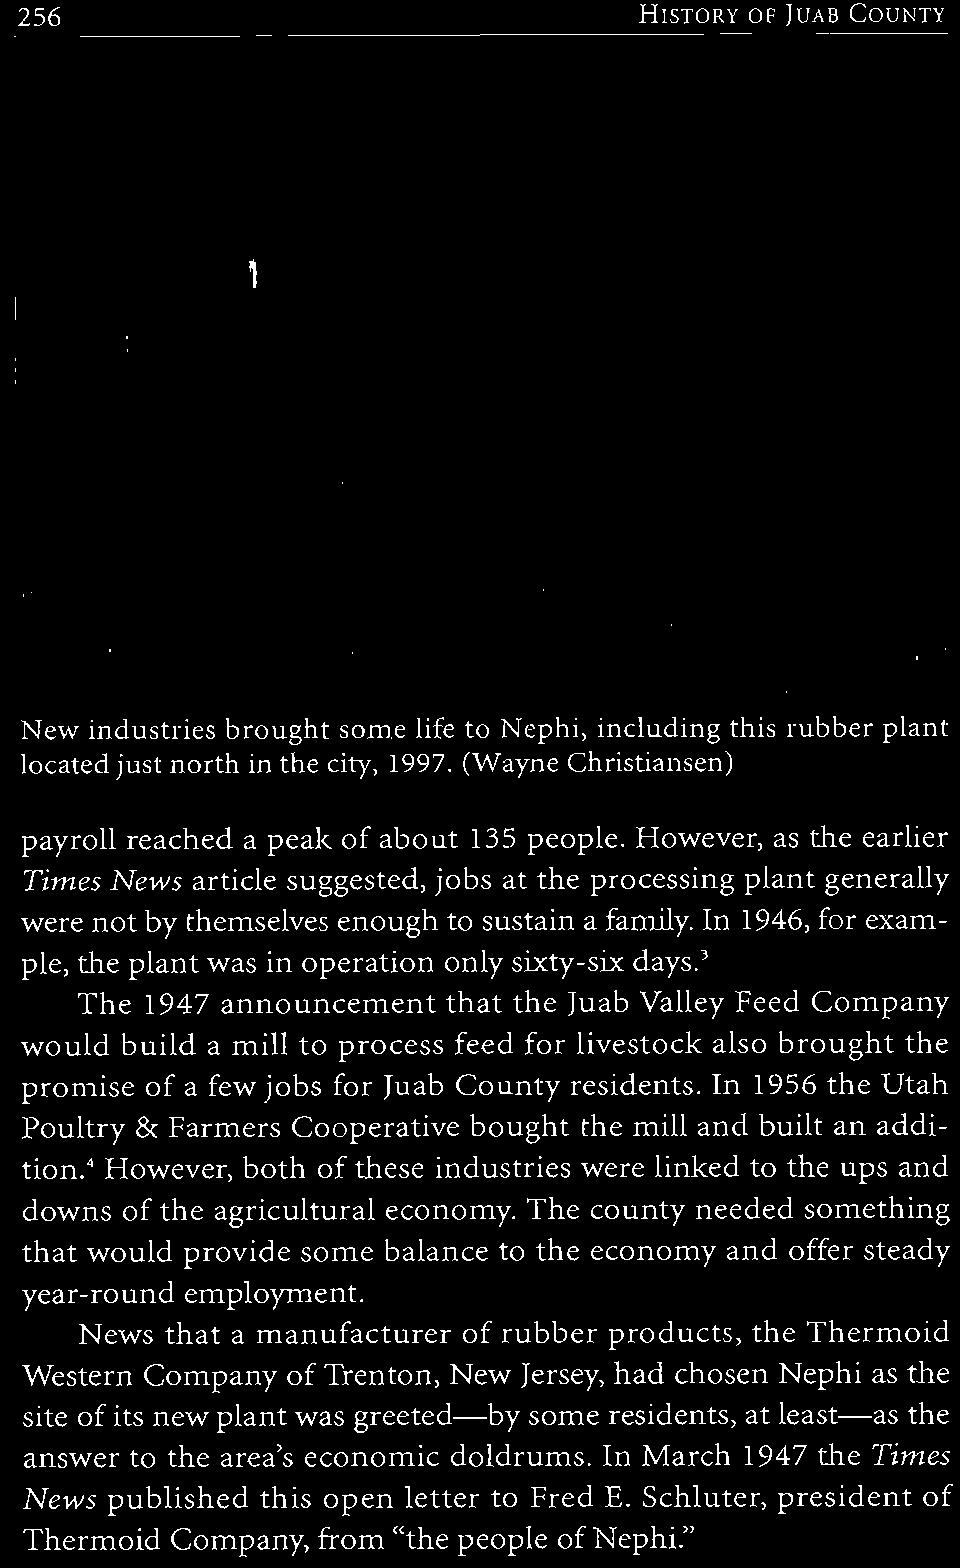 In 1946, for example, the plant was in operation only sixty-six days.